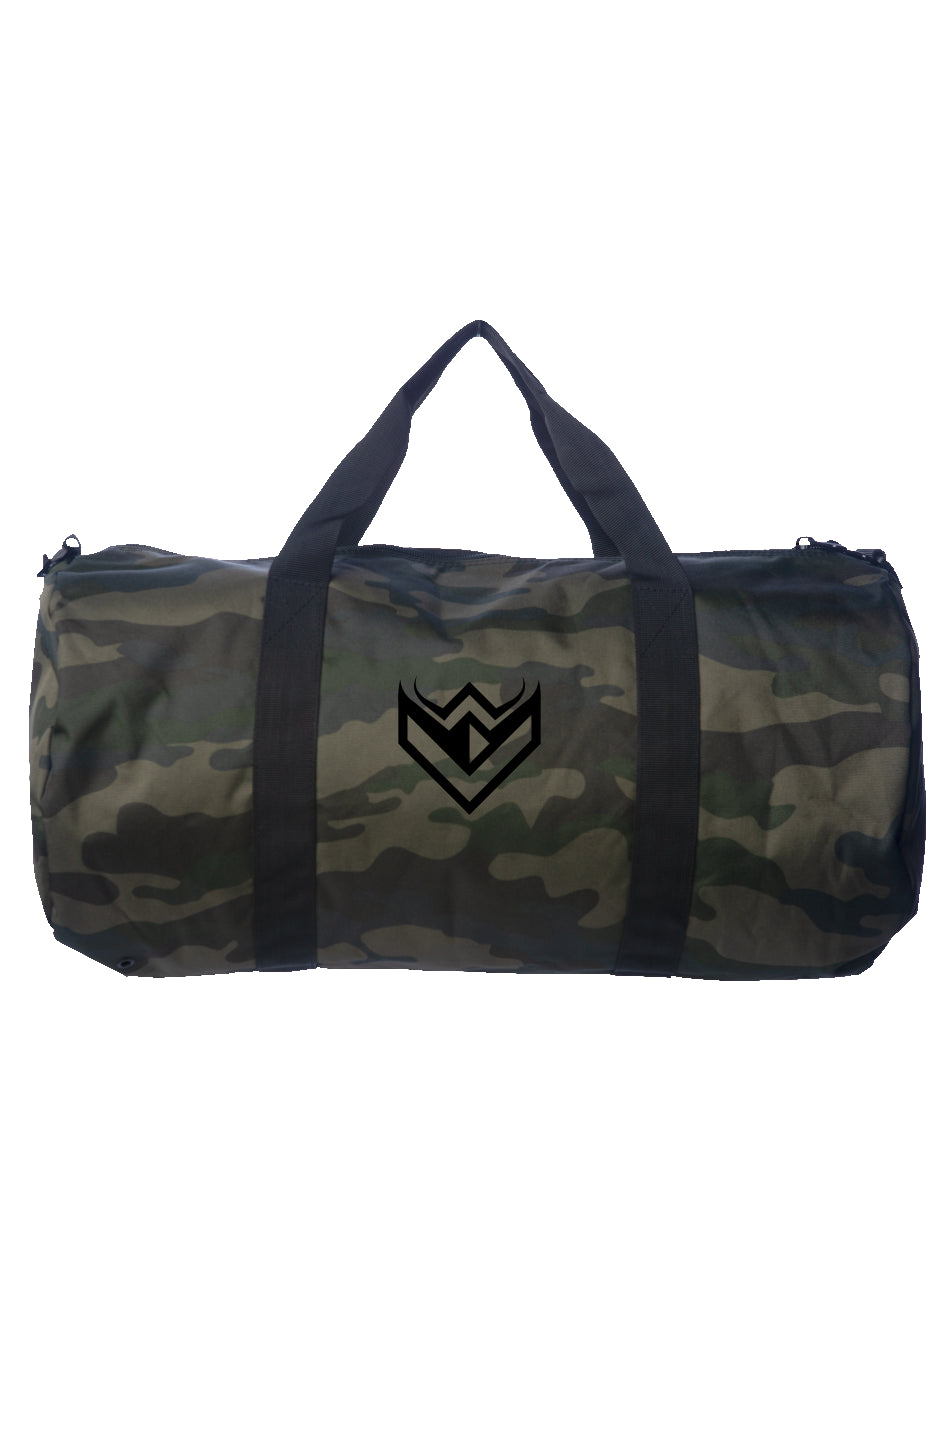 Voyager Forest Camo Duffle Bag